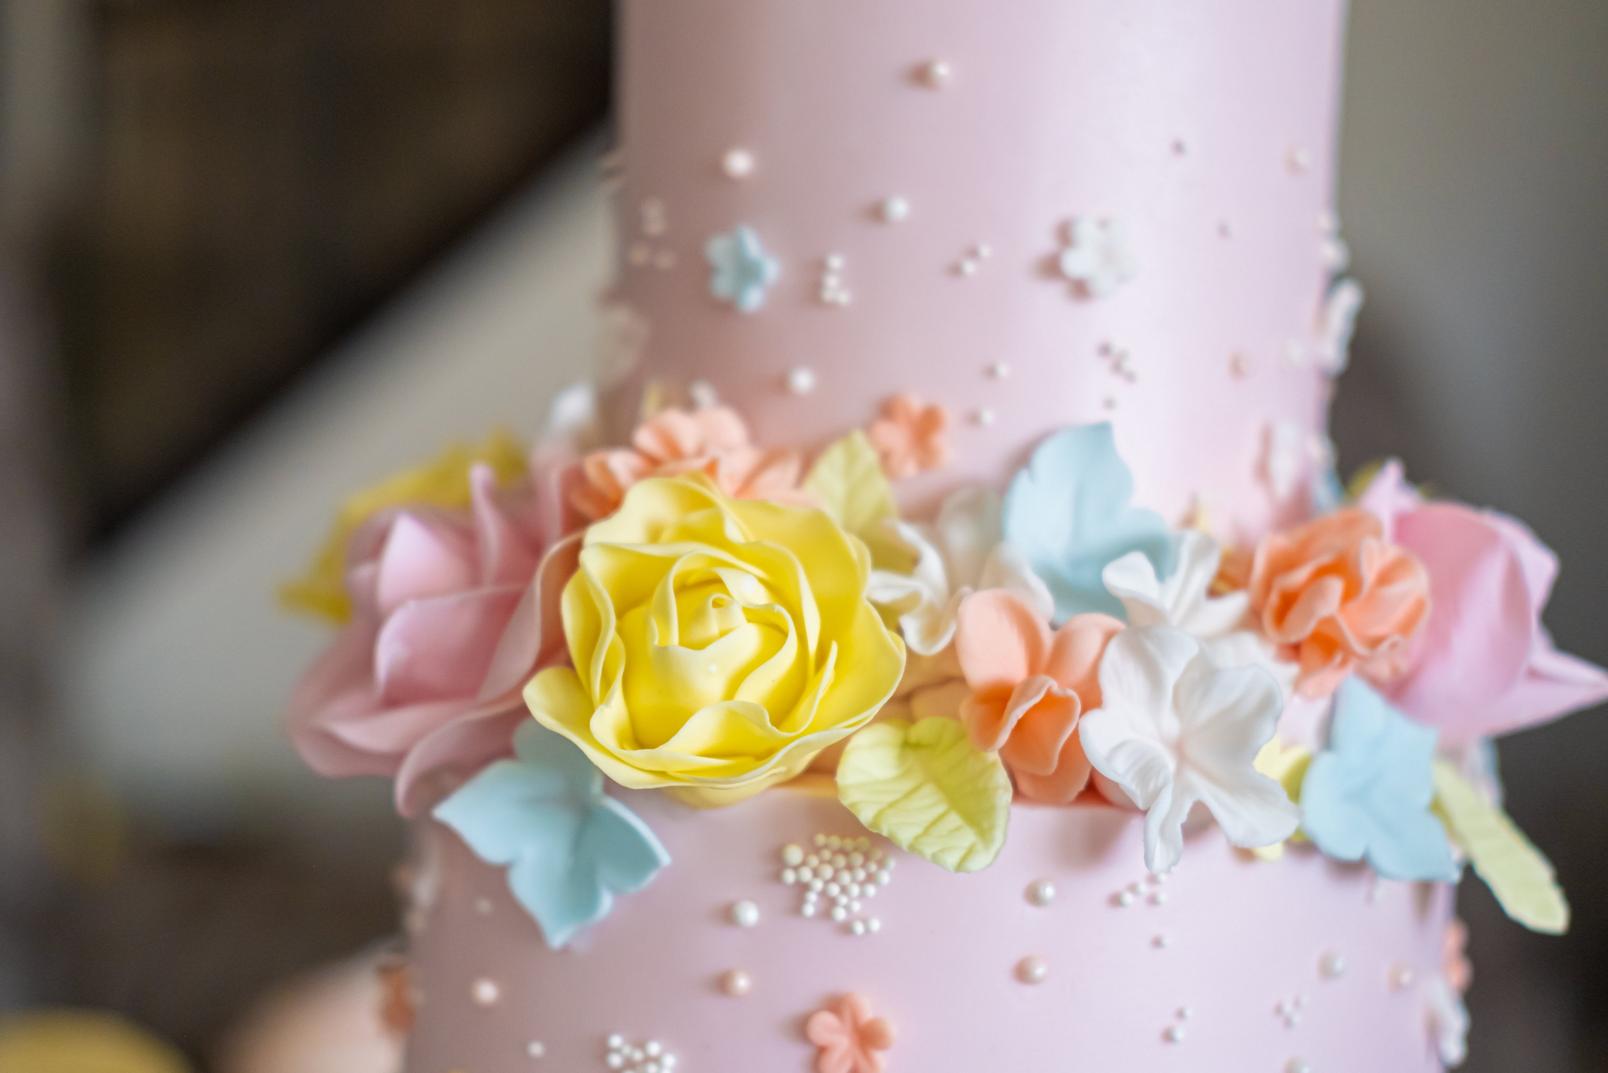 Adding a Floral Touch; Our Birthday Cake Ideas | Interflora